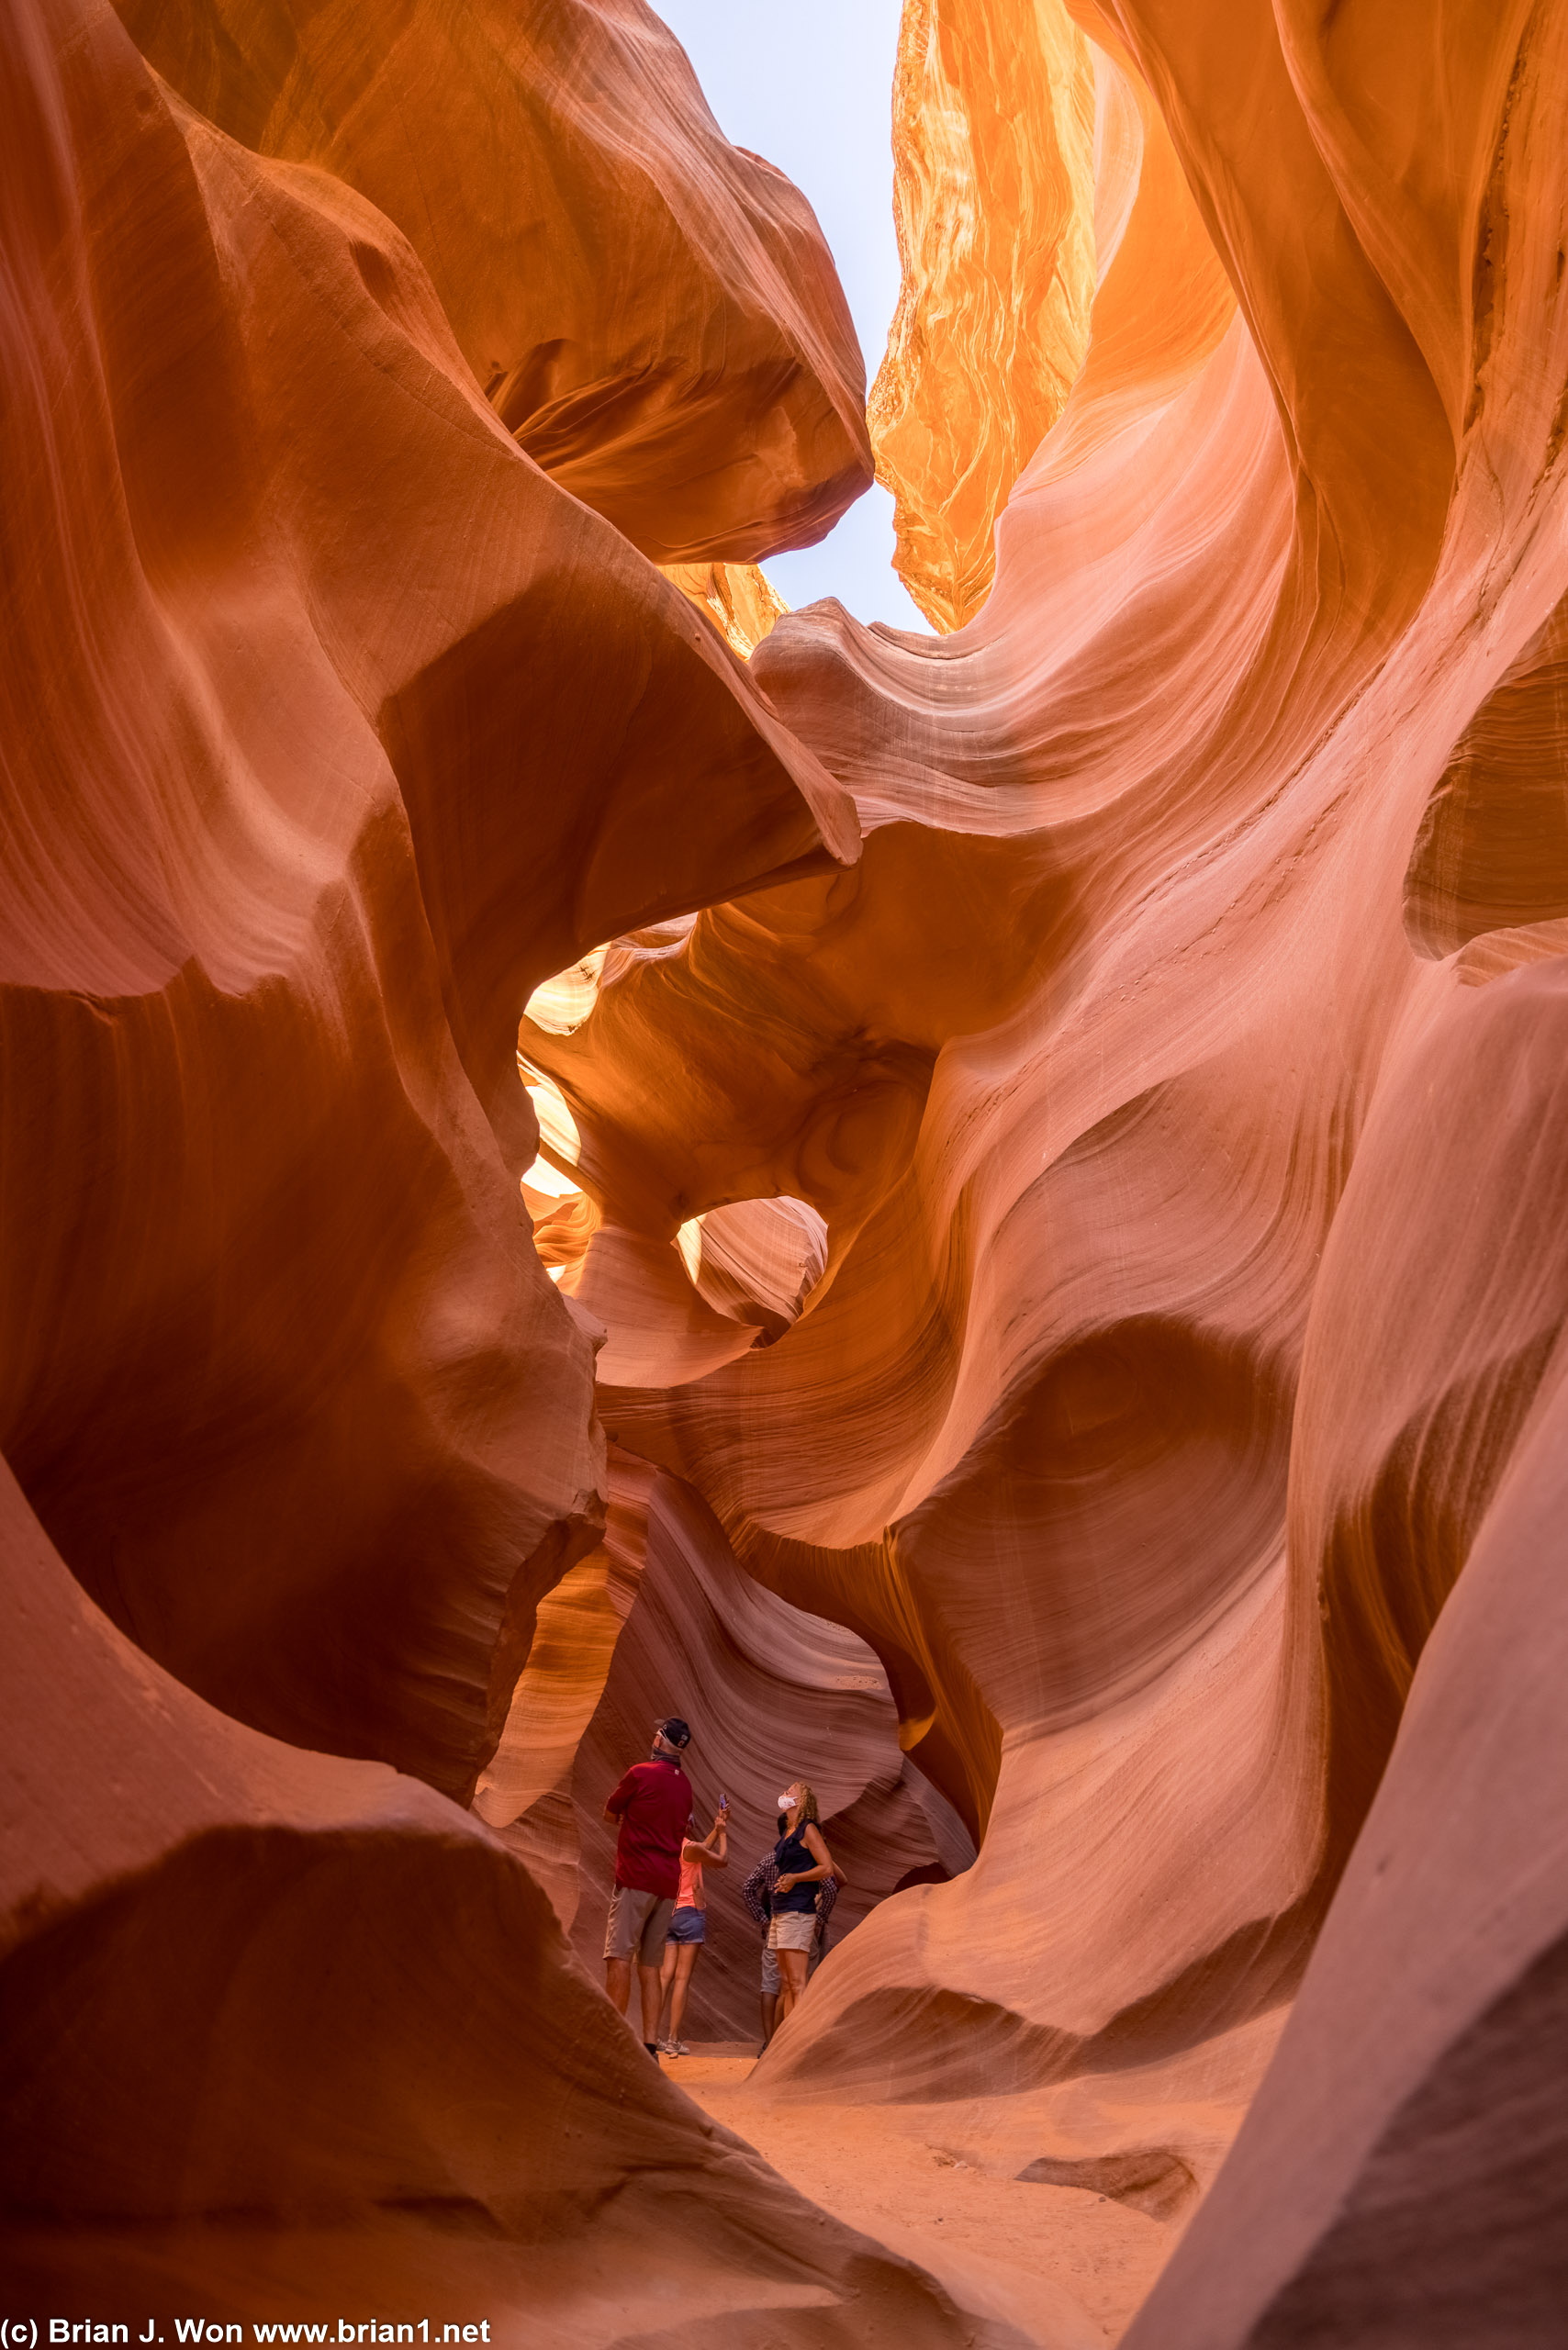 Lower Antelope Canyon is definitely different than Upper Antelope Canyon.